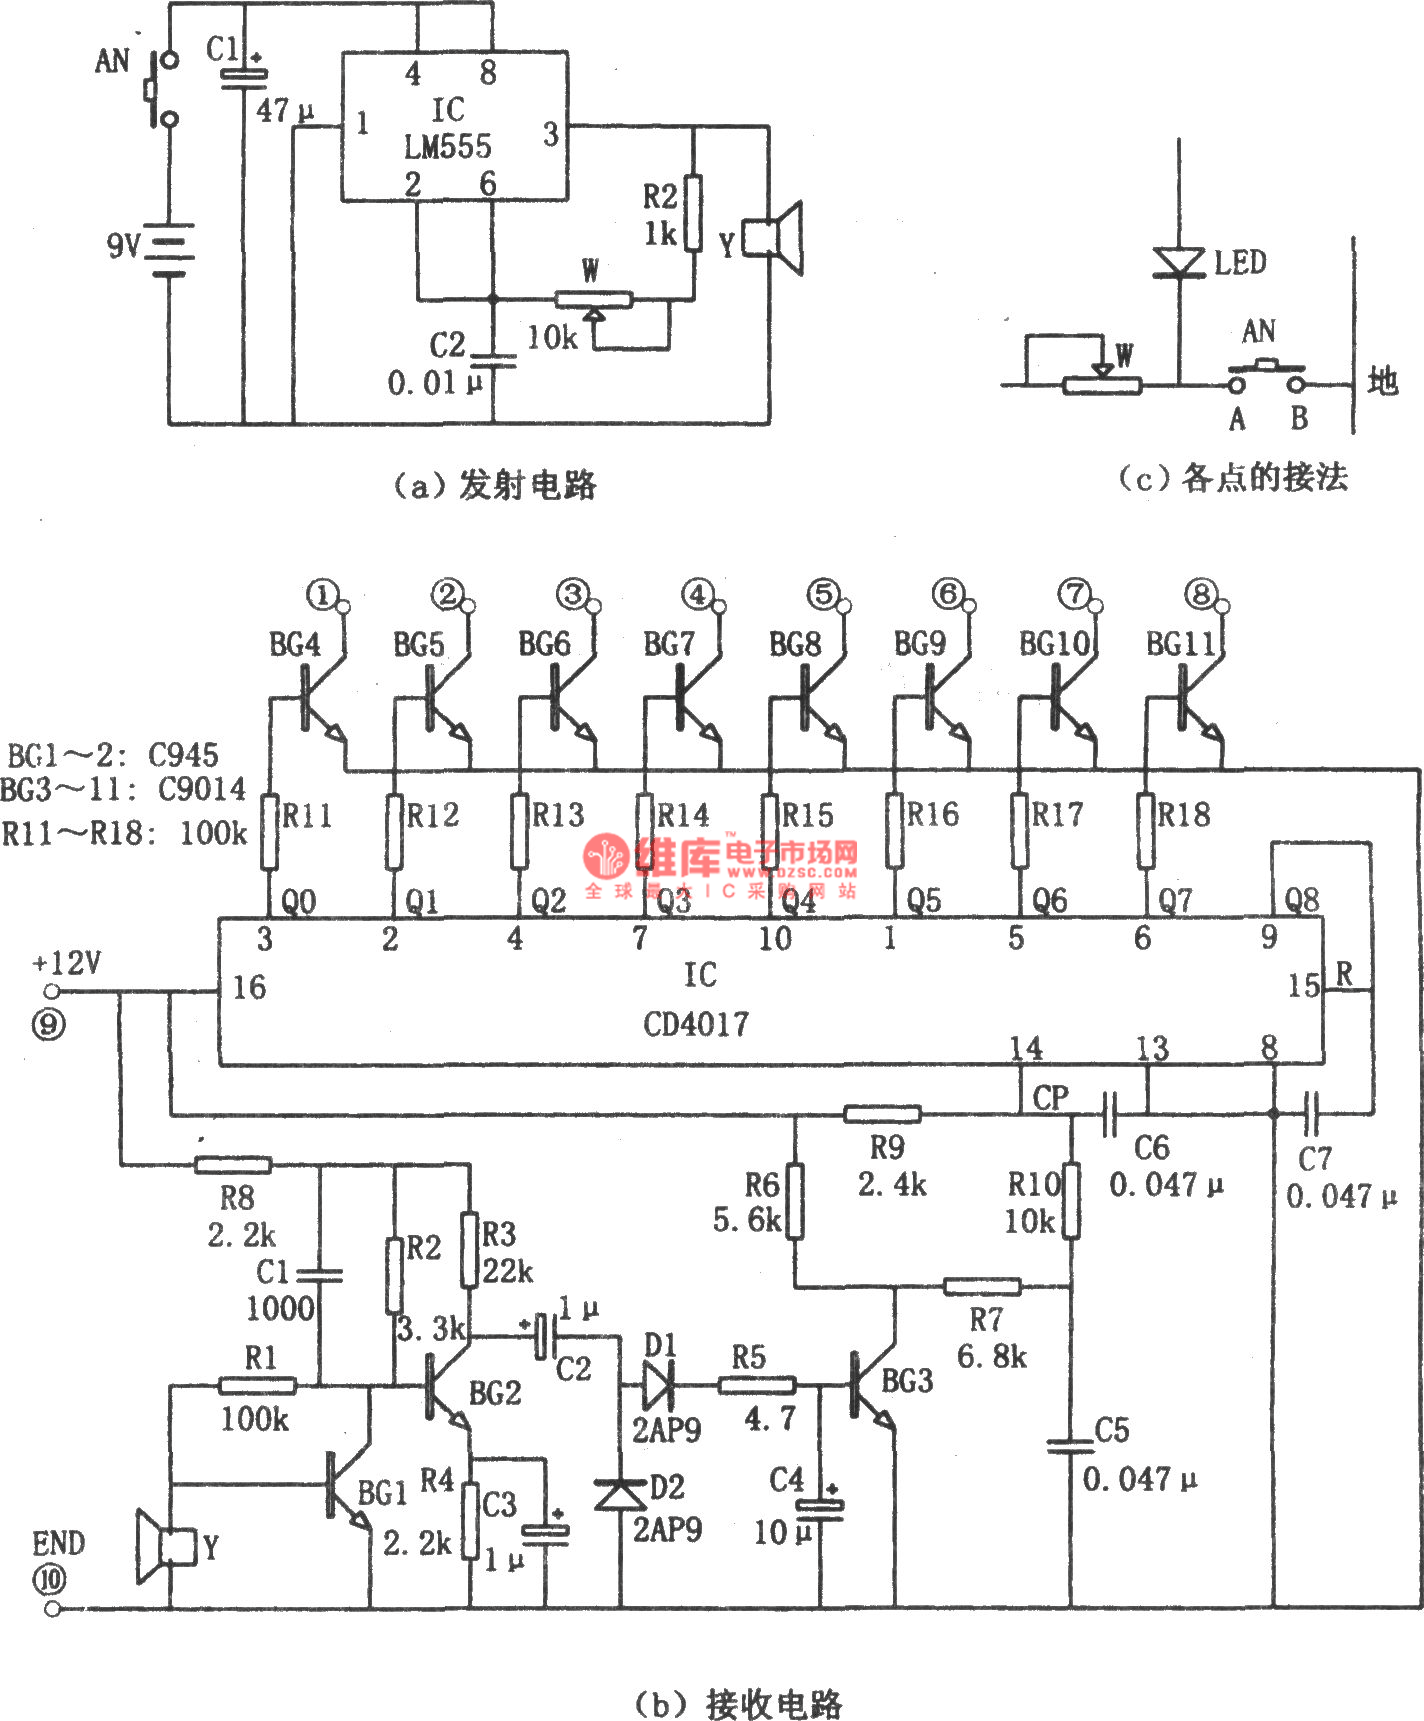 Additional simple TV remote control circuit (LM555, CD4017 ...